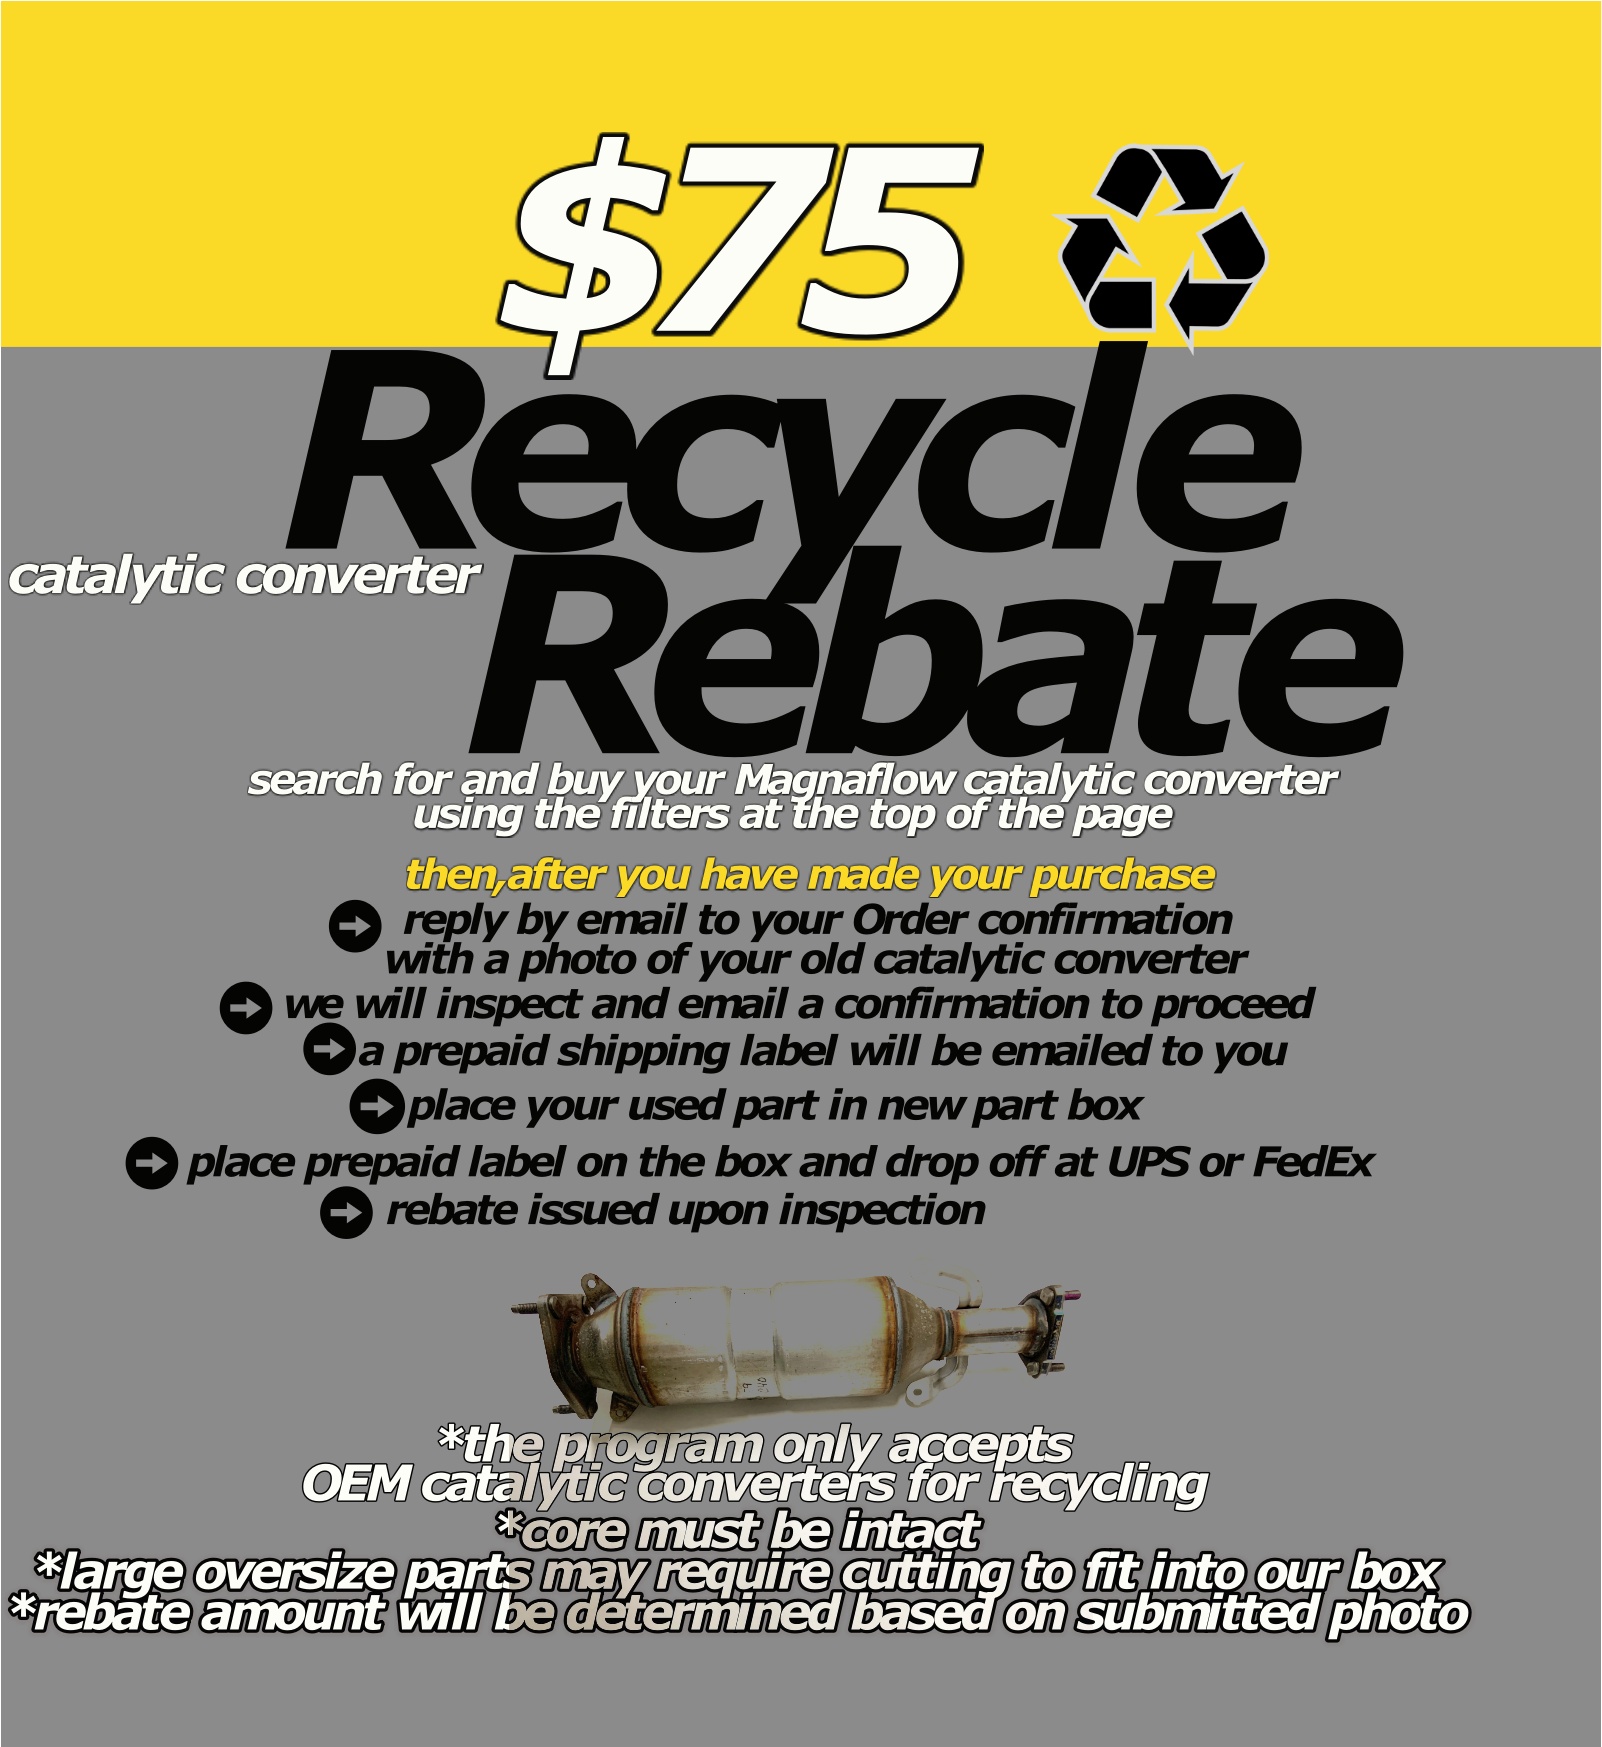 $75+ catalytic converter recycling rebate search for and buy your Magnaflow catalytic converter using the filters at the top of the page reply by email to your Order confirmation  with a photo of your old catalytic converter we will inspect and email a confirmation to proceed place your used part in new part box  *core must be intact *large oversize parts may require cutting to fit into our box *rebate amount will be determined based on submitted photo